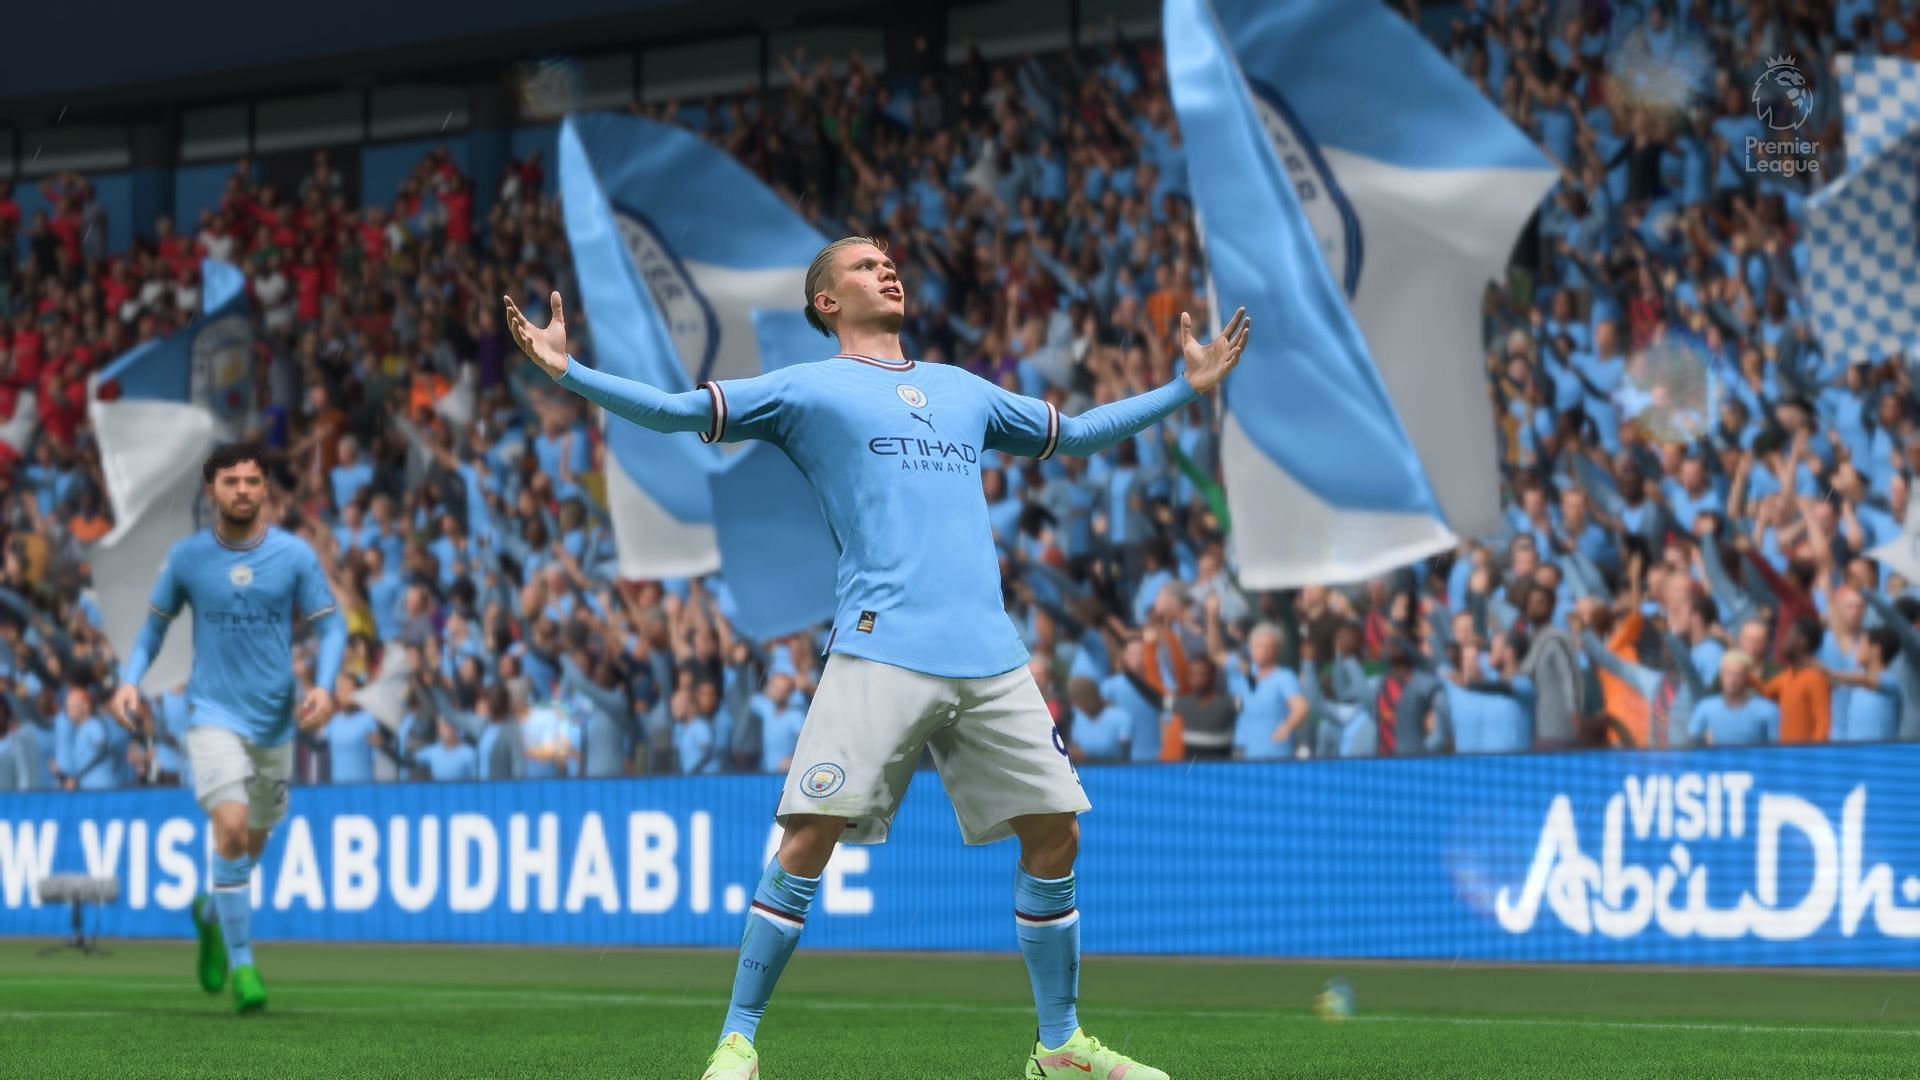 HOW TO ADD FRIENDS ON YOUR PC IN FIFA 22, PLAY FIFA 22 WITH FRIENDS ON PC